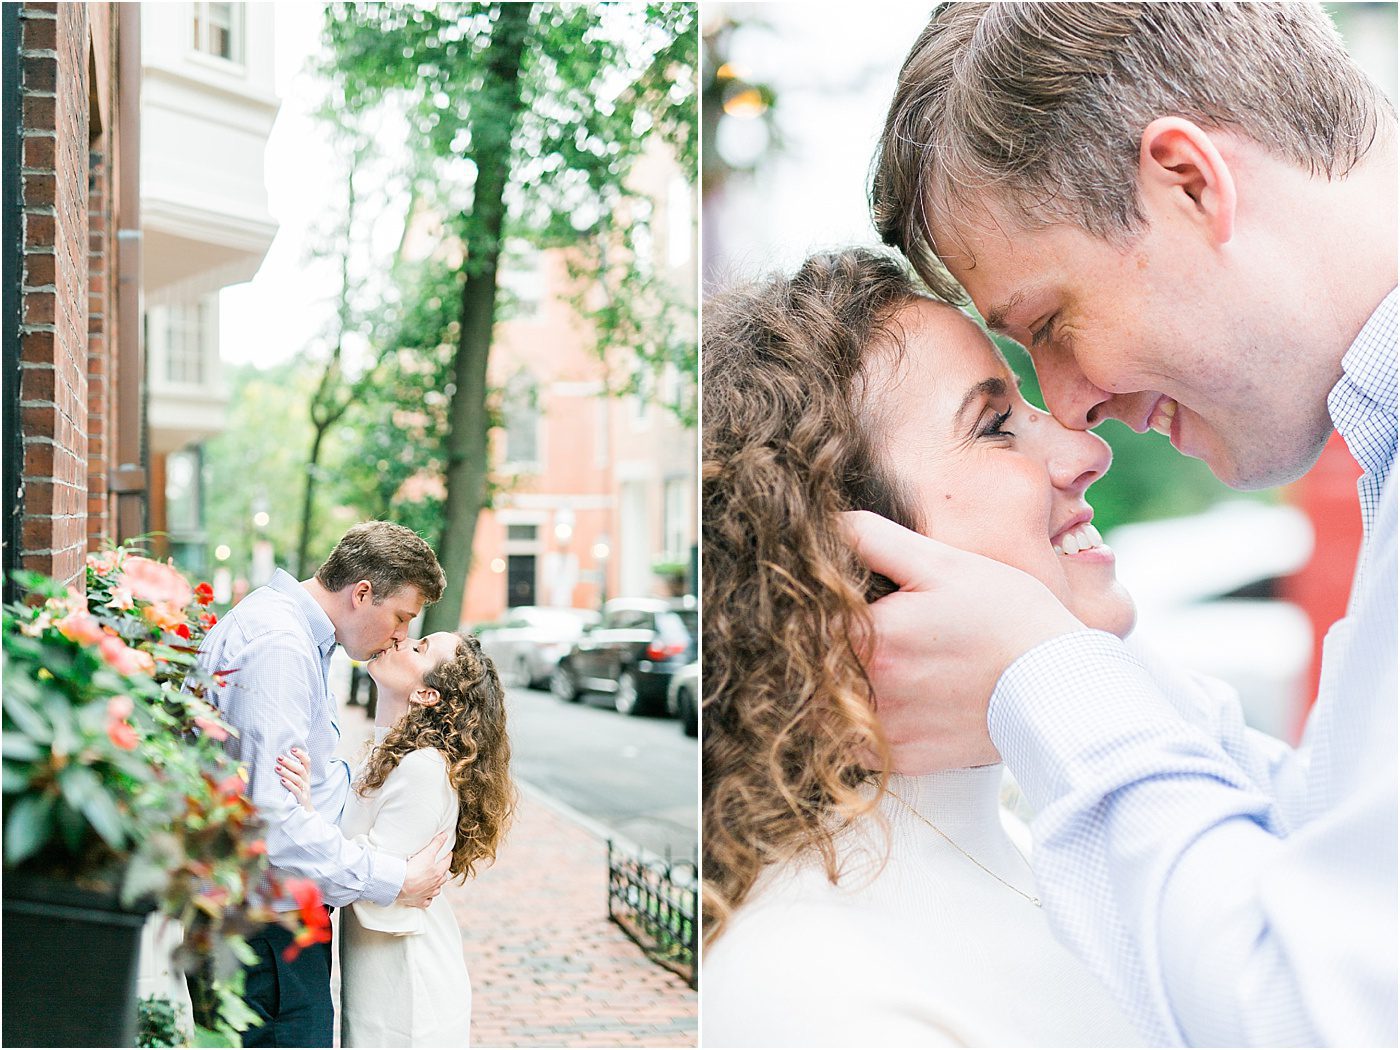 Urban engagement photos in Beacon Hill | Catherine Ann Photography